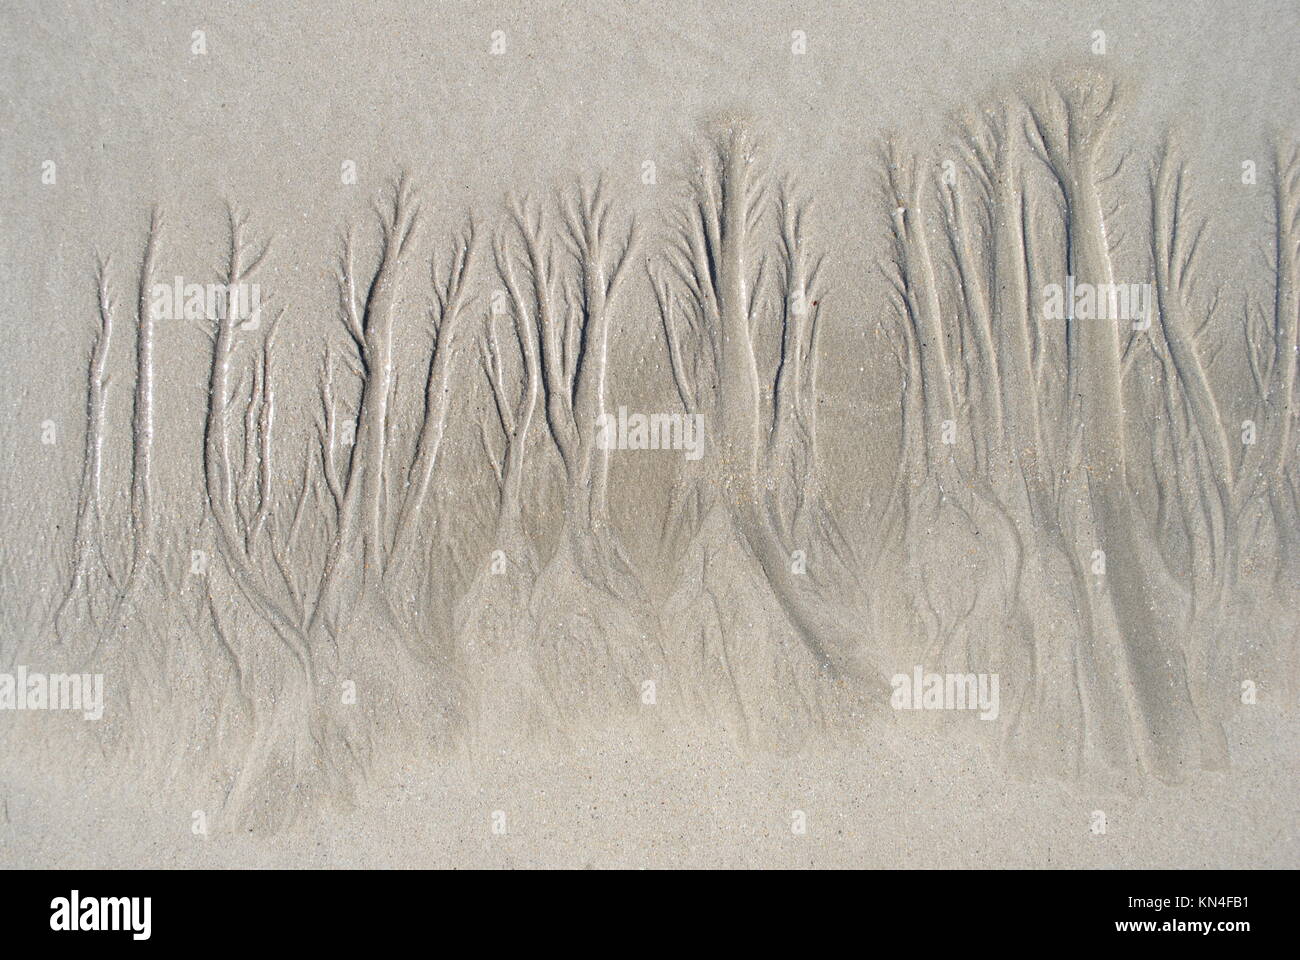 Sand Art, Receeding Tide Patterns in the sand Stock Photo